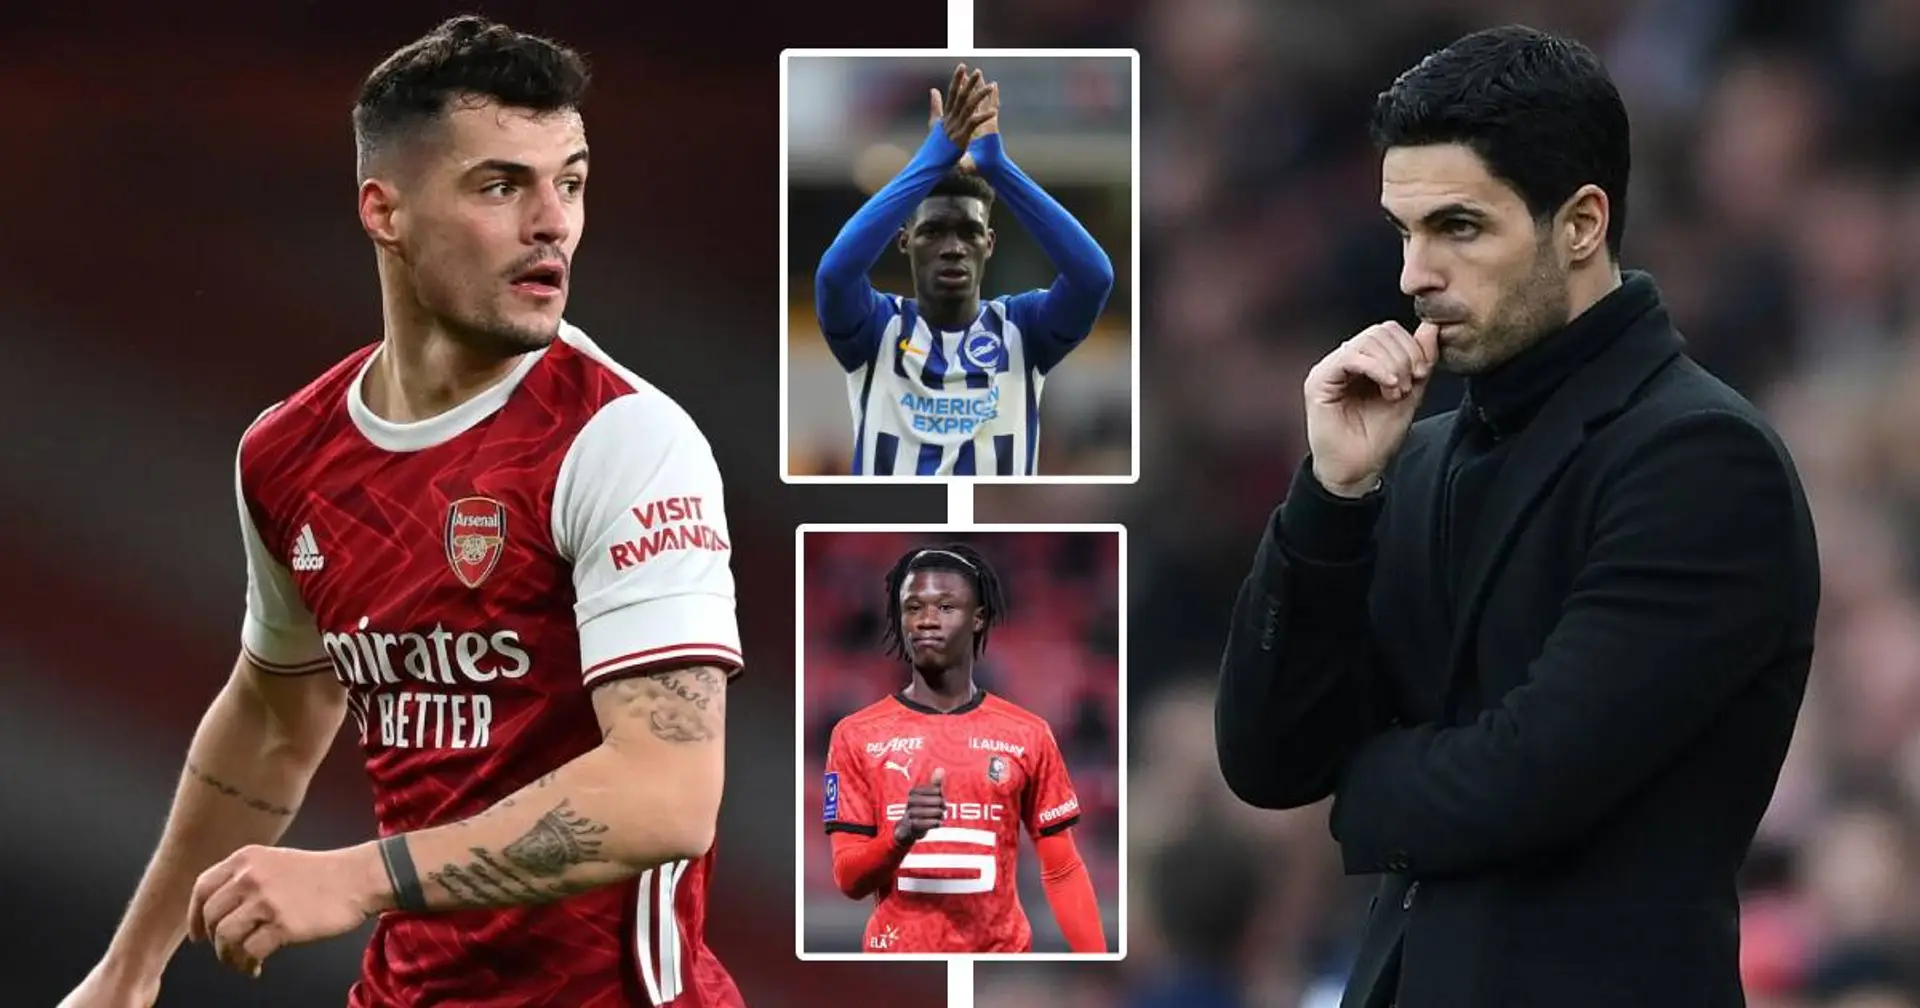 'We are selling in a buyer's market': fan explains why letting Xhaka go might be strategically unwise